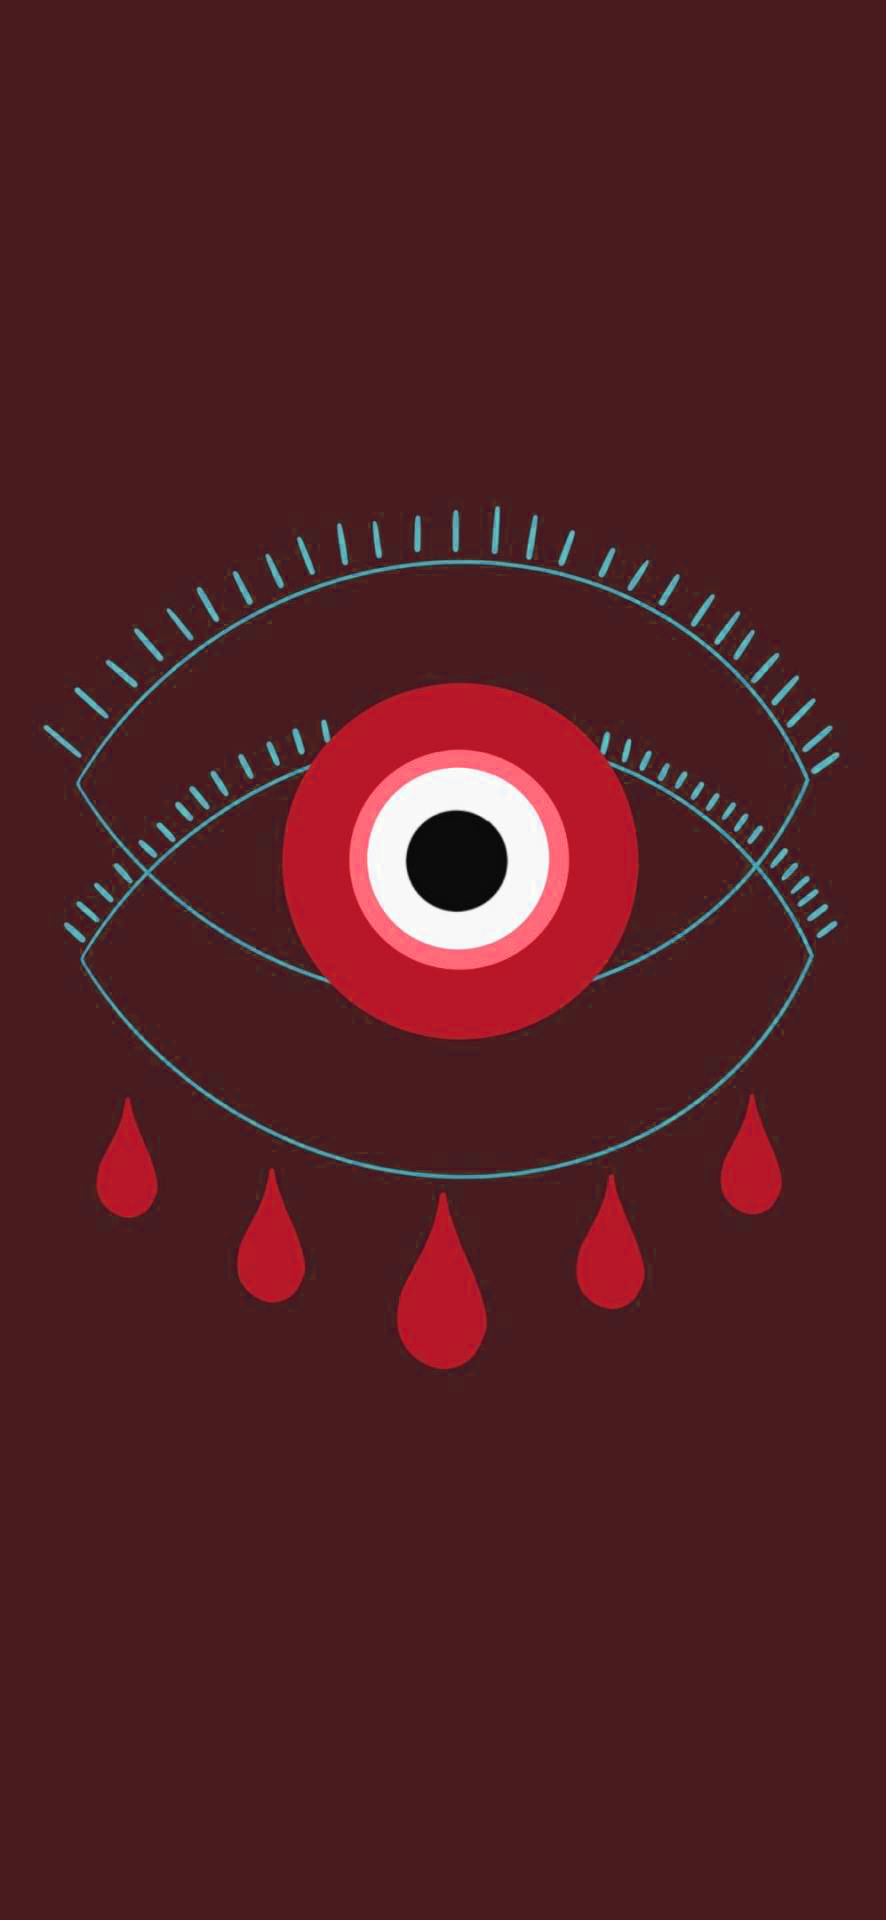 Share 52+ evil eye iphone wallpaper - in.cdgdbentre